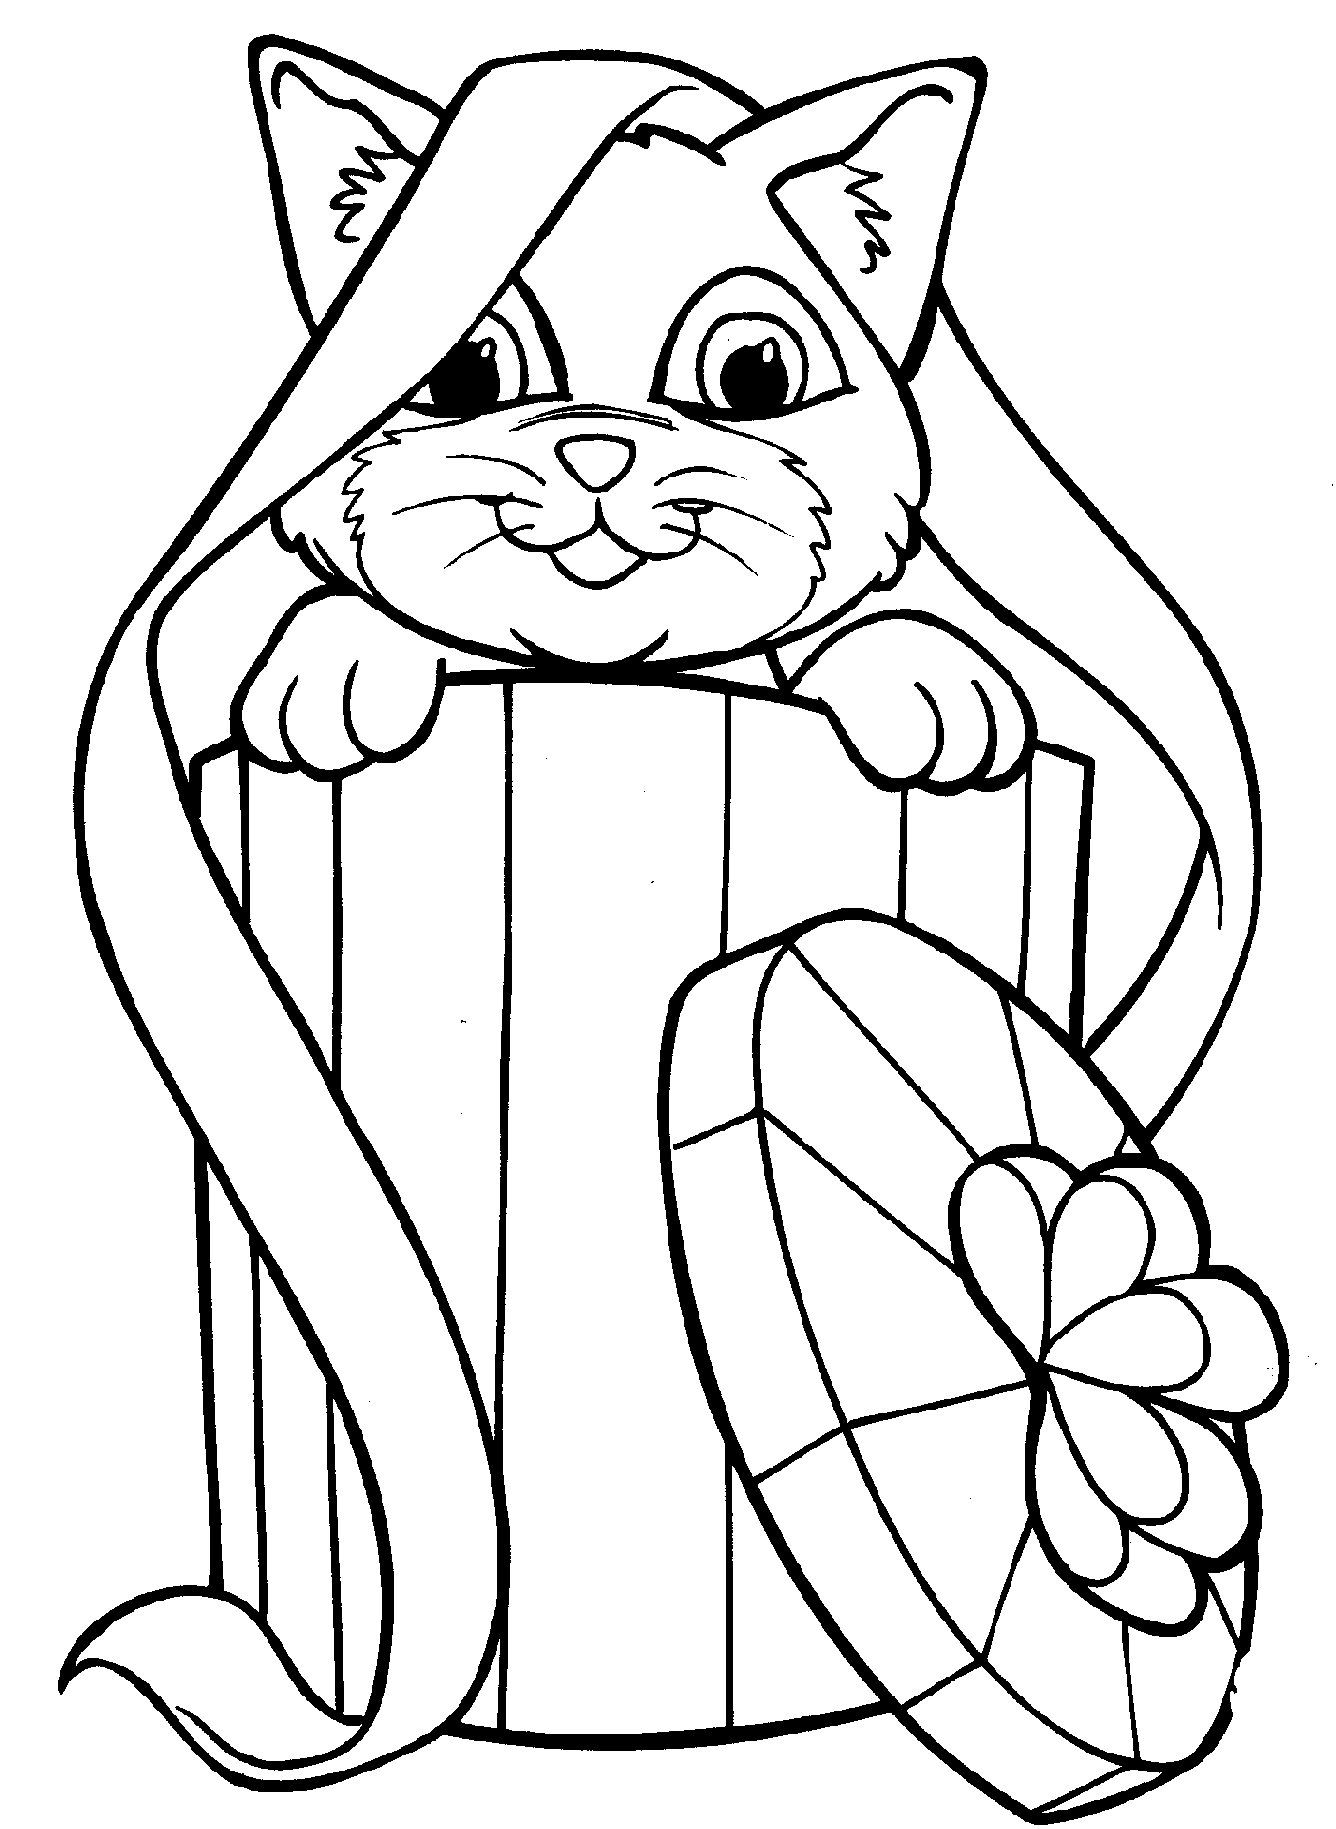 cute kitten colouring pages cute kitten coloring pages getcoloringpagescom kitten cute colouring pages 